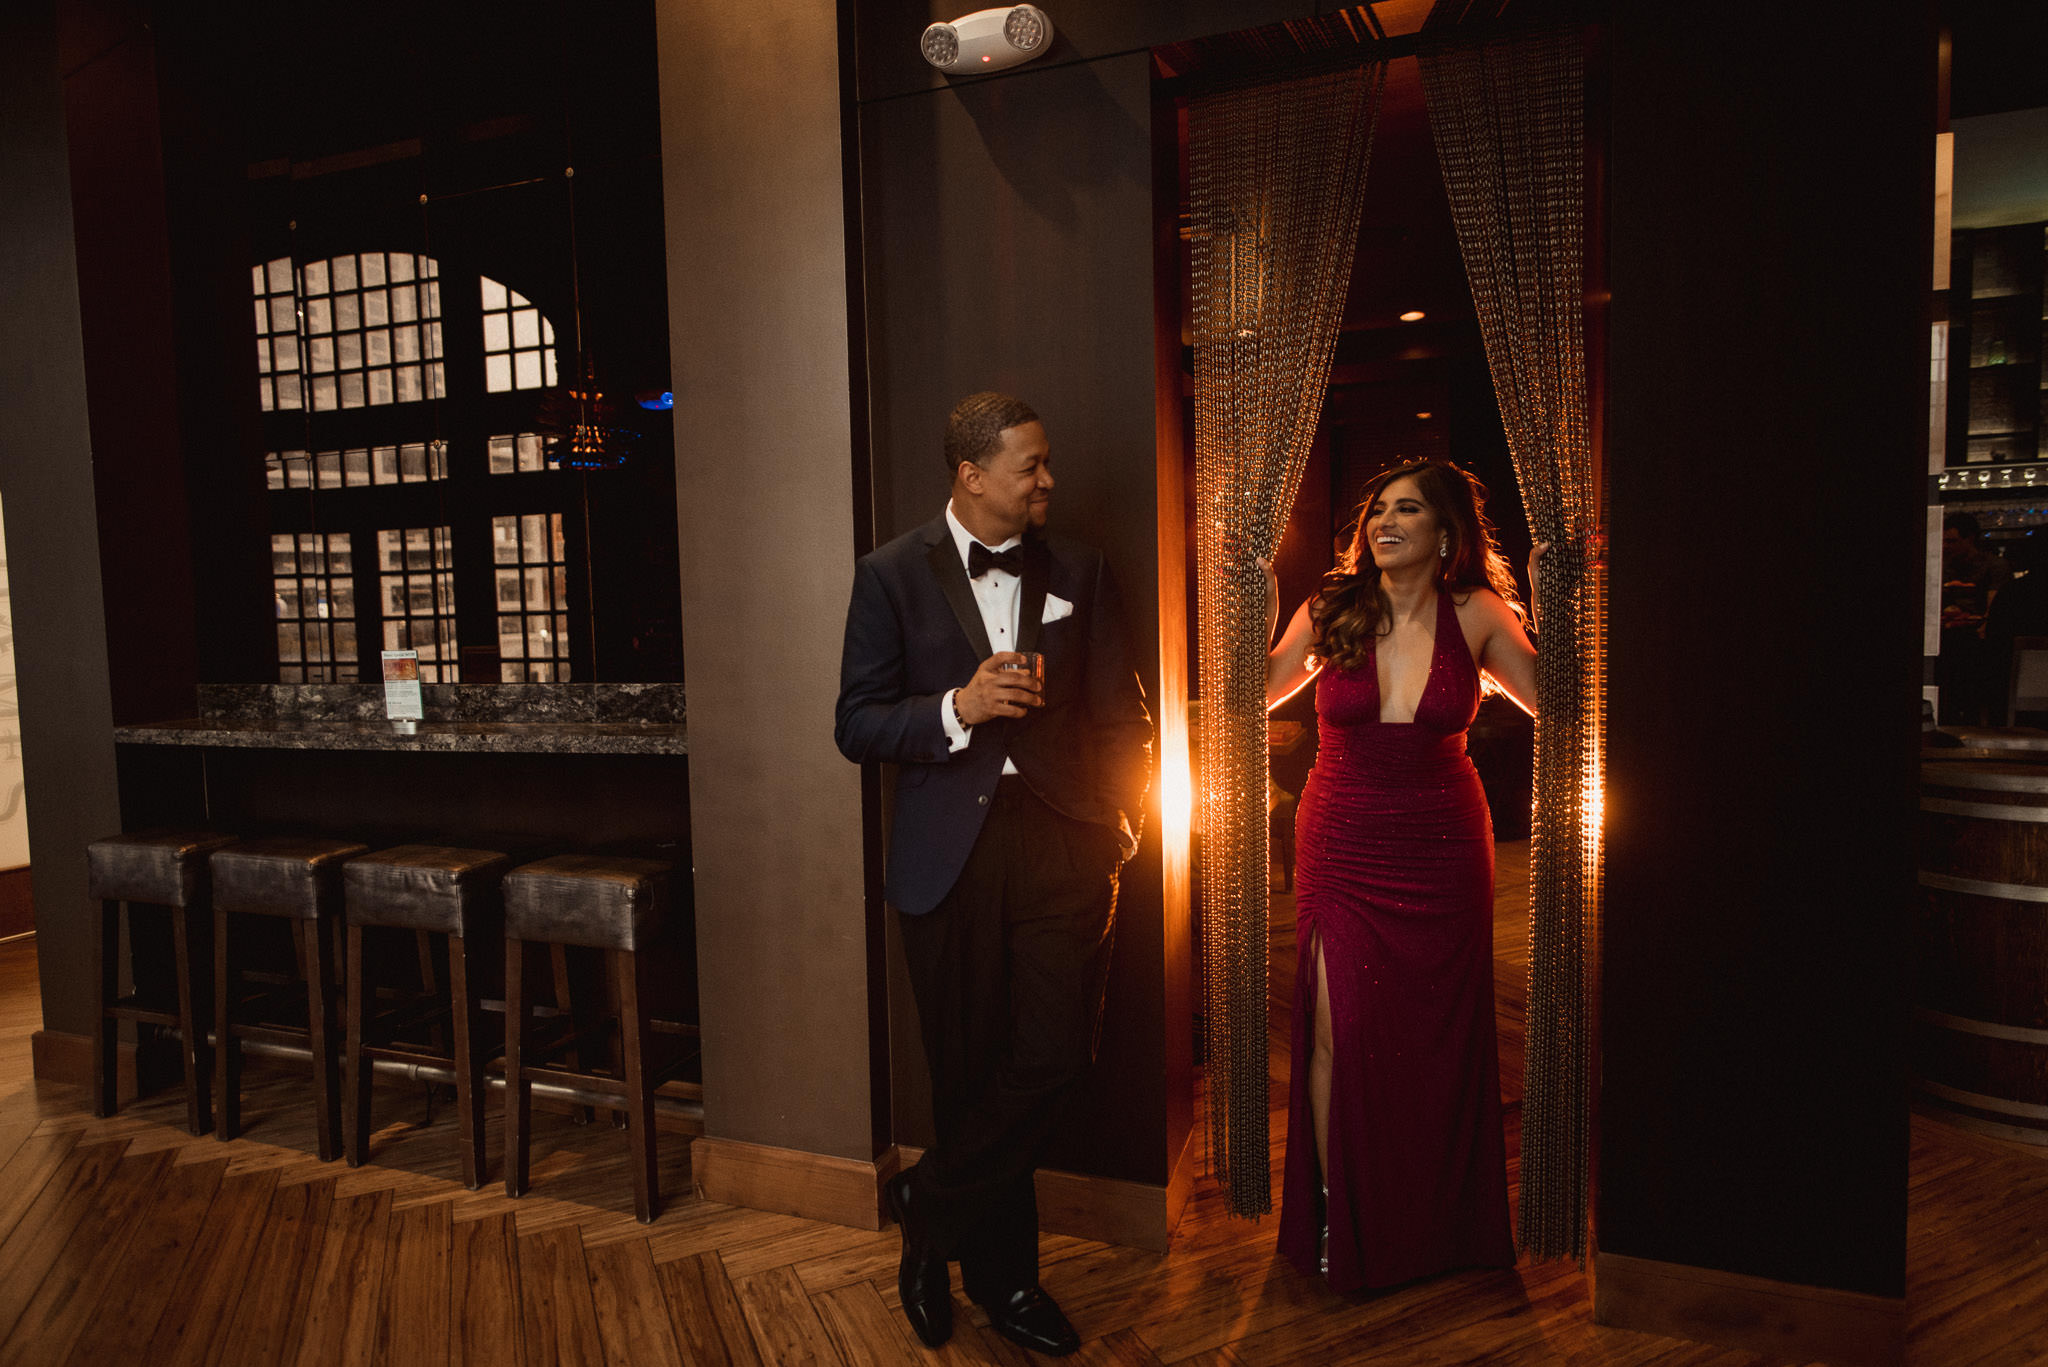 lawless-swanky-classy-iconic-bar-houston-black-tie-engagement-photographer-alcohol-cocktails-drinks-lifestyle